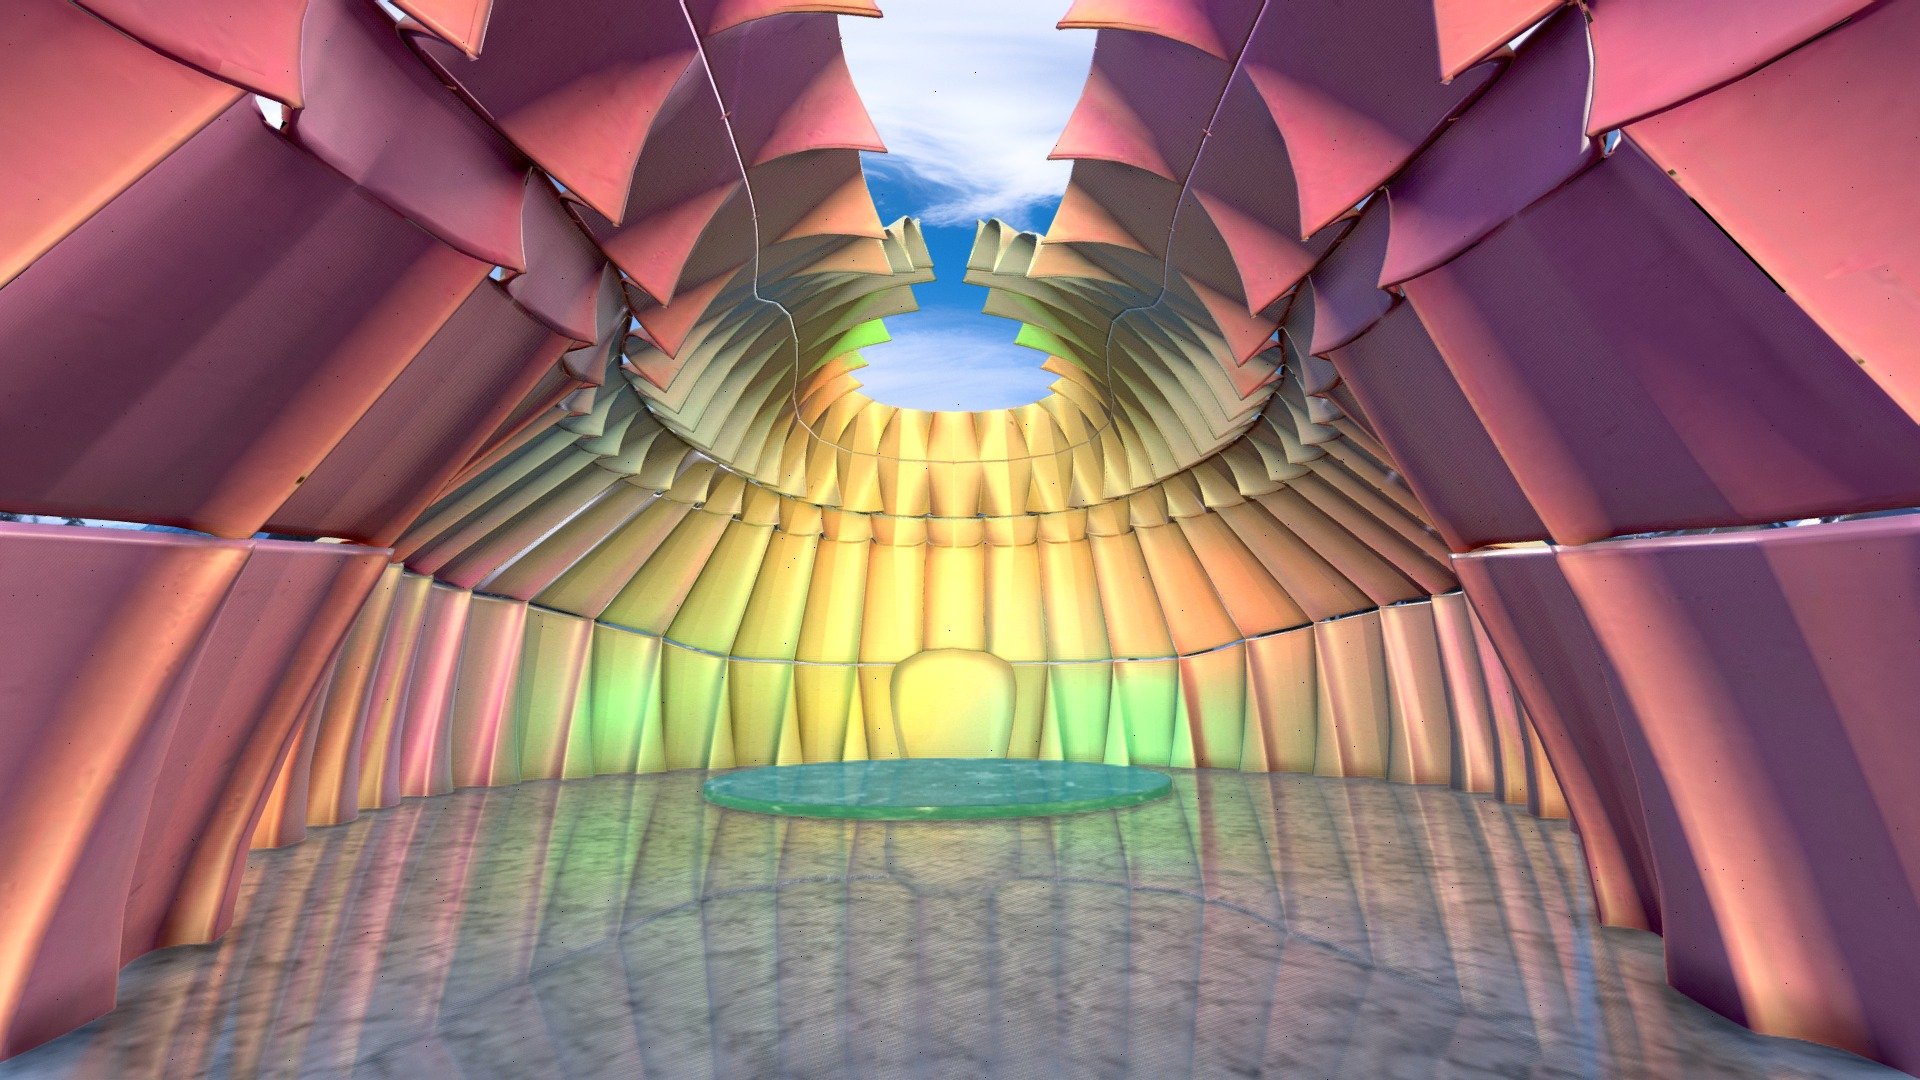 About
Experience the mesmerizing beauty of our Folded Fabric Tessellated Dome. This architectural structure boasts a tesselated design resembling folded, colorful fabric, creating a dynamic space of flowing light and shadow filled with a rainbow of colors. Perfect for interactive performances, concerts, meditation, and product showcases, our dome also features cascading colorful light and an open sky, immersing you in an unforgettable virtual experience. 

Assets
The immersive interior space, optimized mesh, and game-ready assets make it easy to use in a variety of projects. Download our multiple file types (.gltf, .usdz, .blender) today and let the inspiration begin 3d model